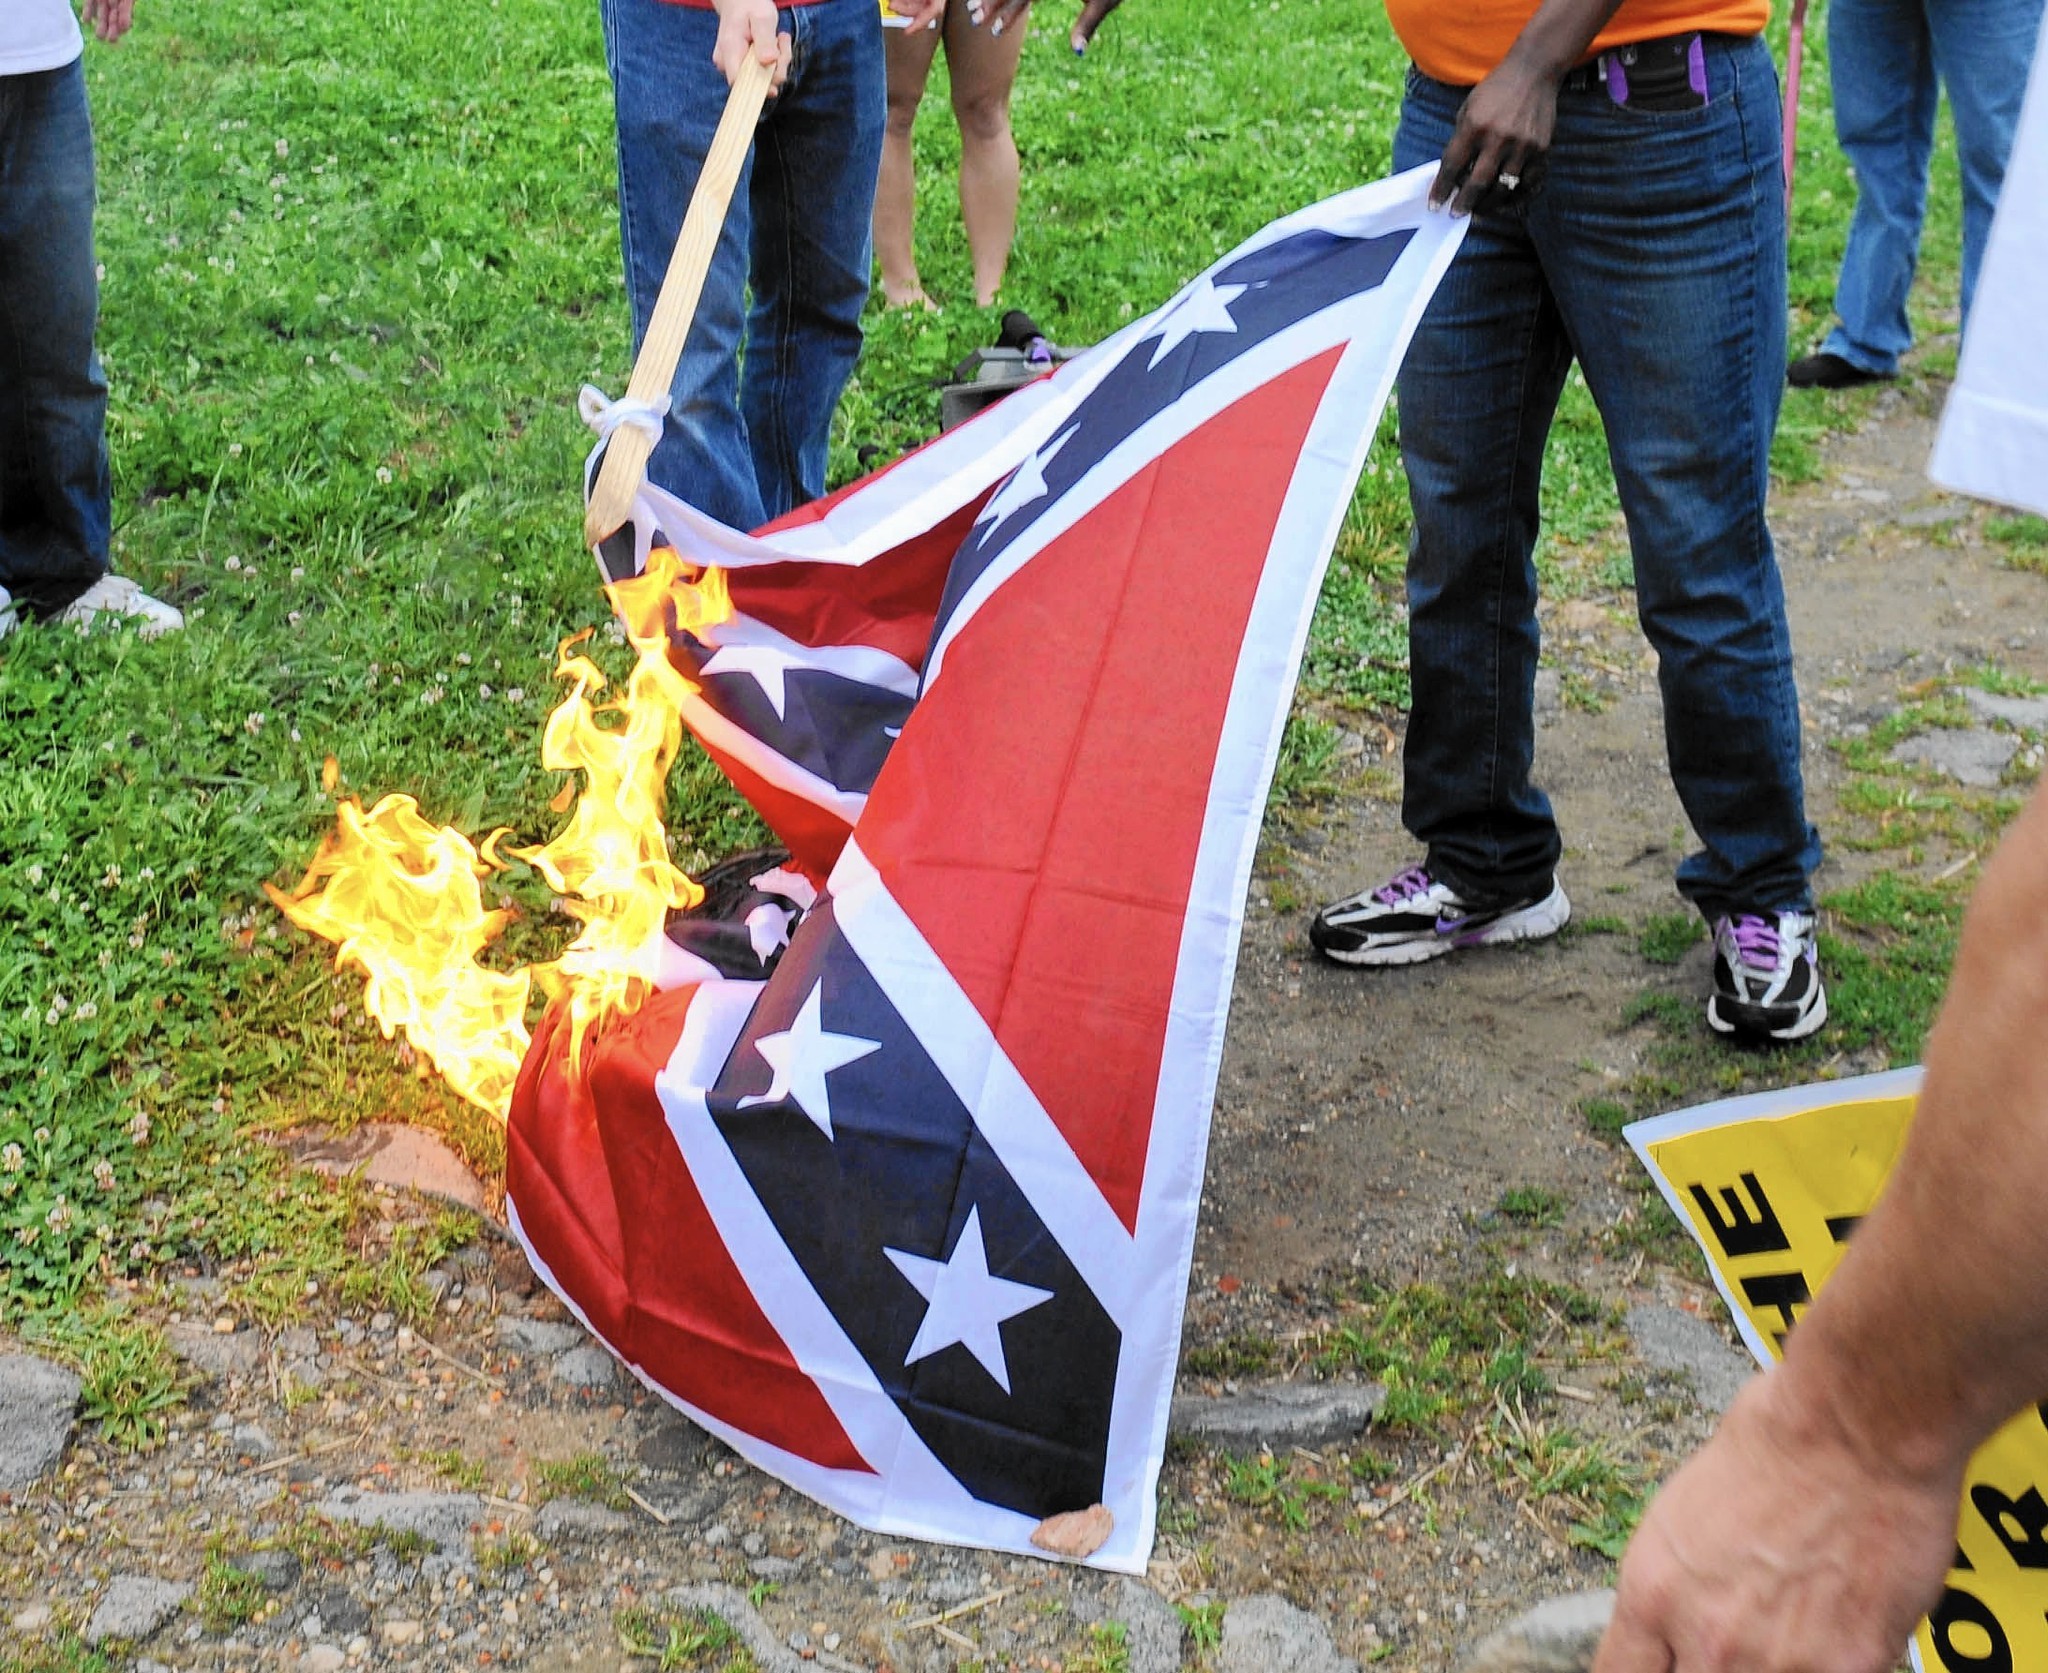 No "Confederate flag burning" memes have been featured yet. 